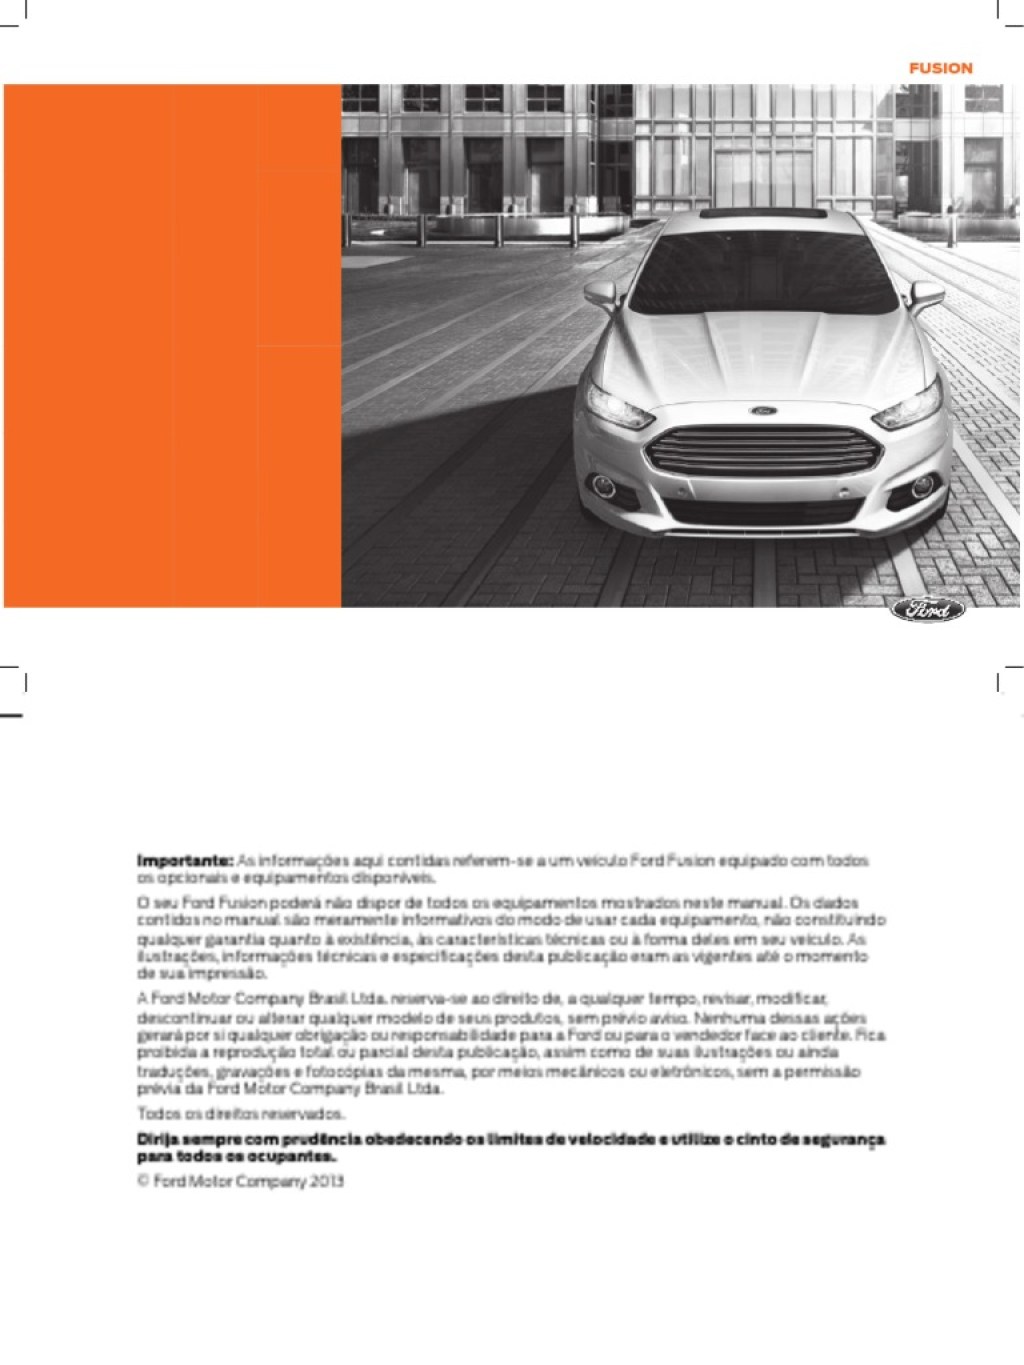 Picture of: Manual Ford Fusion   PDF  Airbag  Celulares